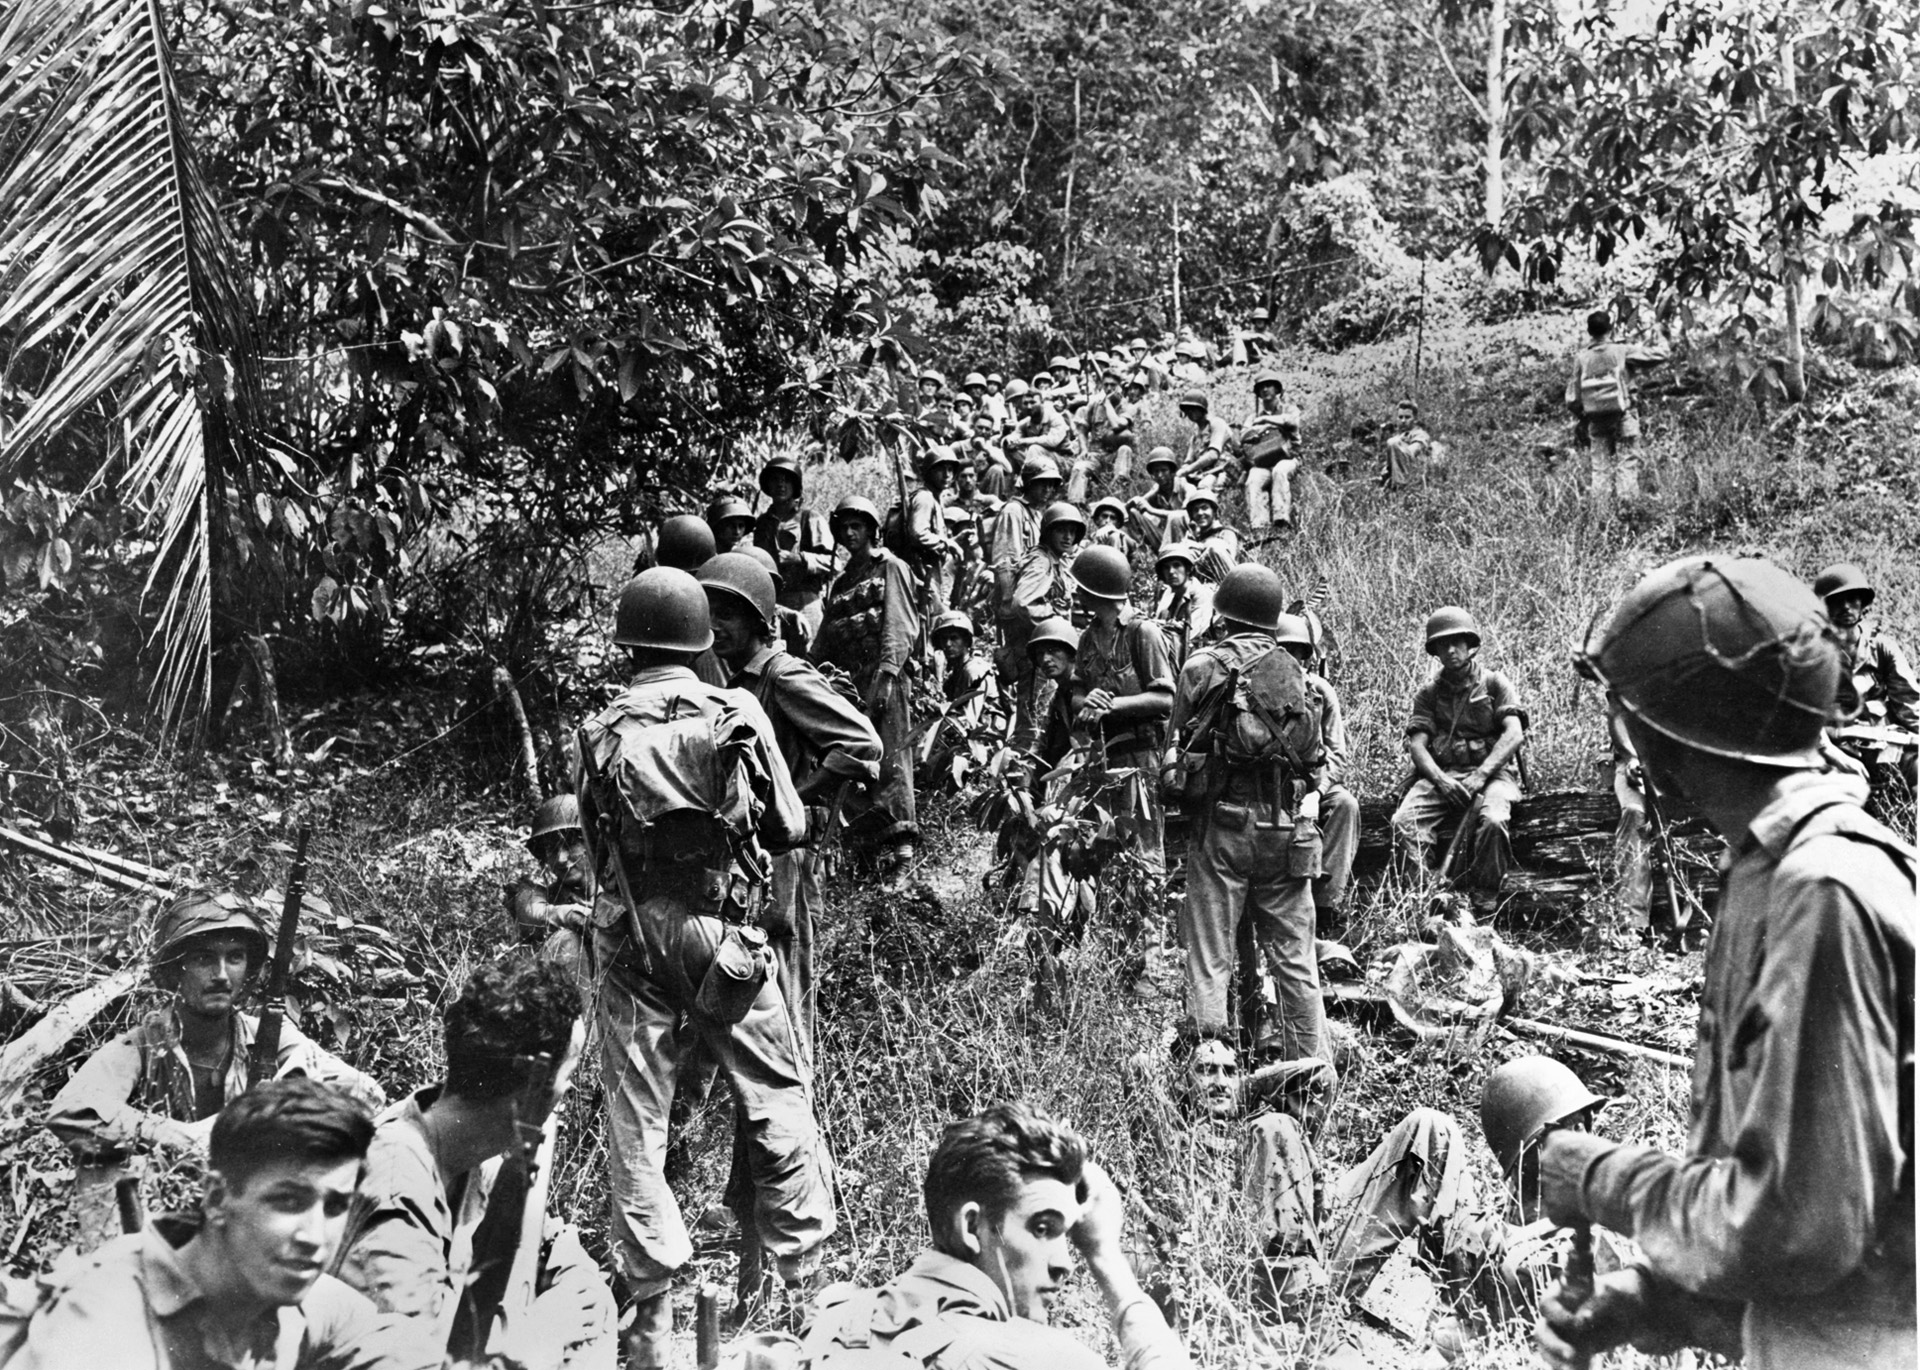 After hitting the invasion beaches and moving inland, U.S. Marines take a brief rest on Guadalcanal in the Solomons. The Guadalcanal campaign would be the Marines’ first and longest major battle of the war—lasting six months, from August 7, 1942 until February 9, 1943. This unit has yet to be issued the distinctive splotched camouflage helmet covers. 